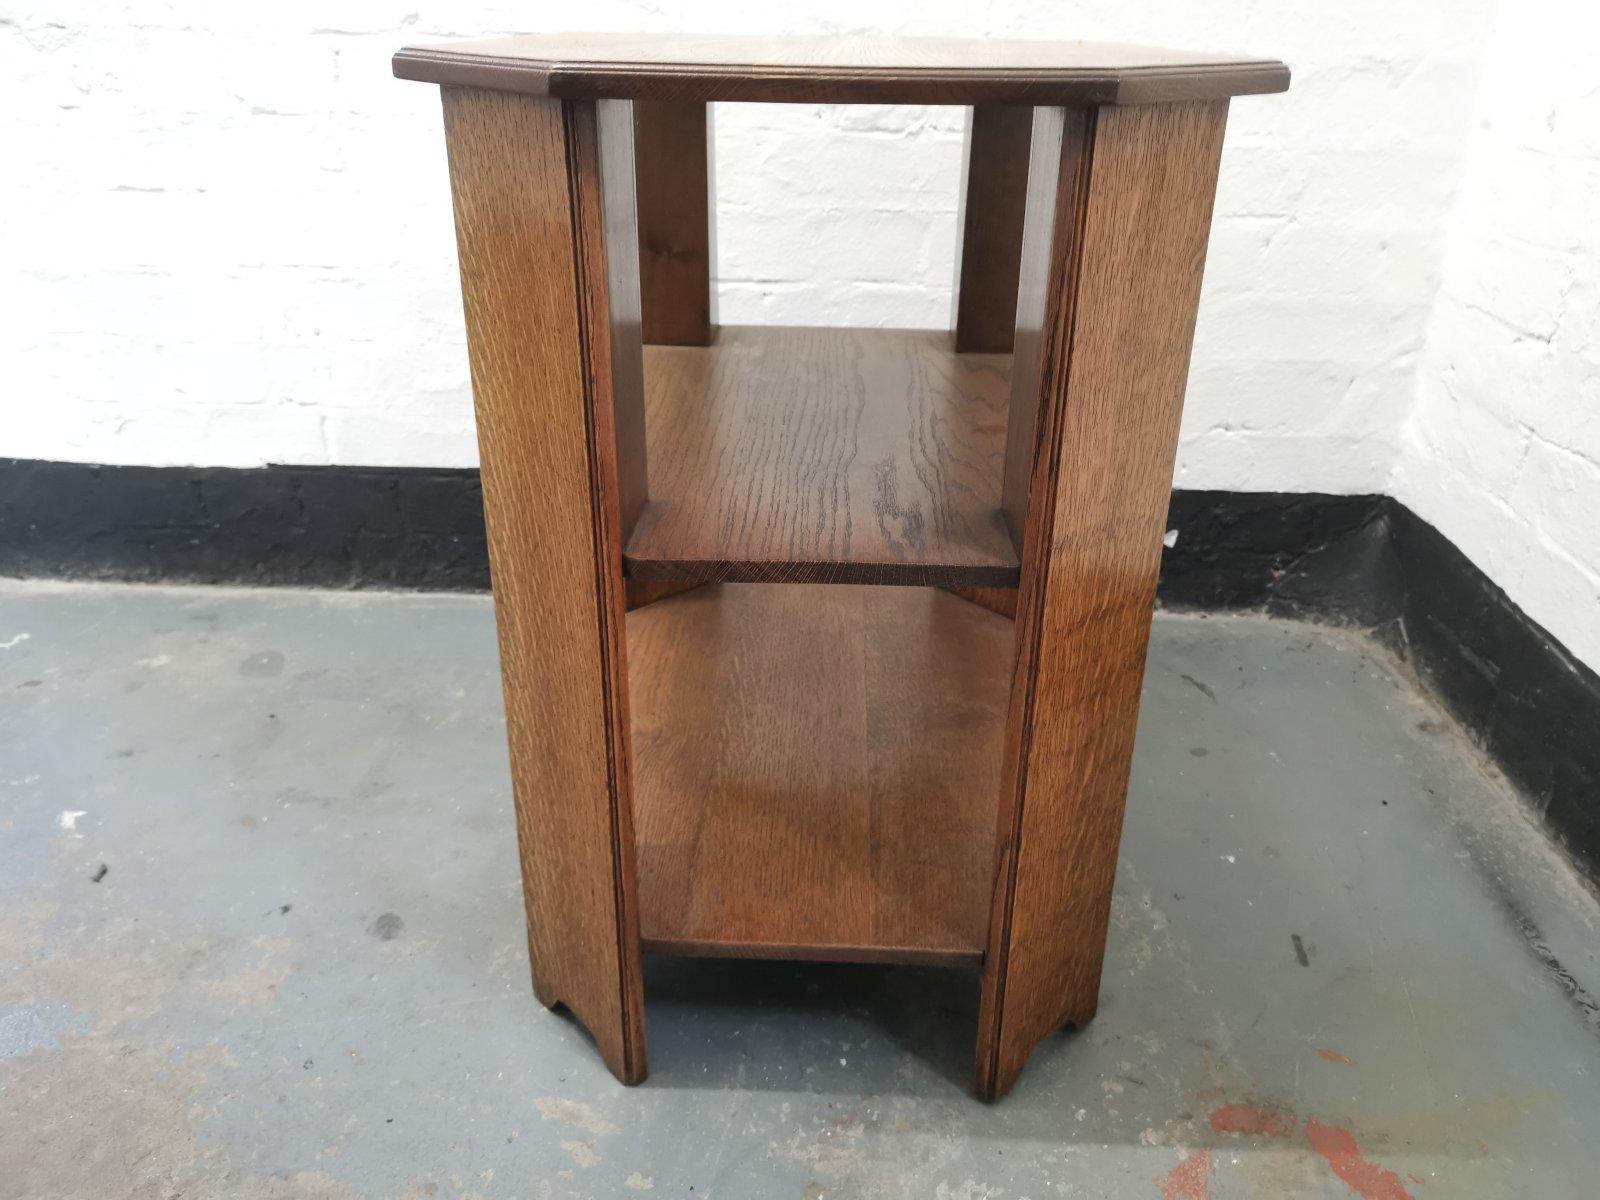 Arts and Crafts Heals, An English Arts & Crafts Oak Side Table with Three Tiers & Canted Corners